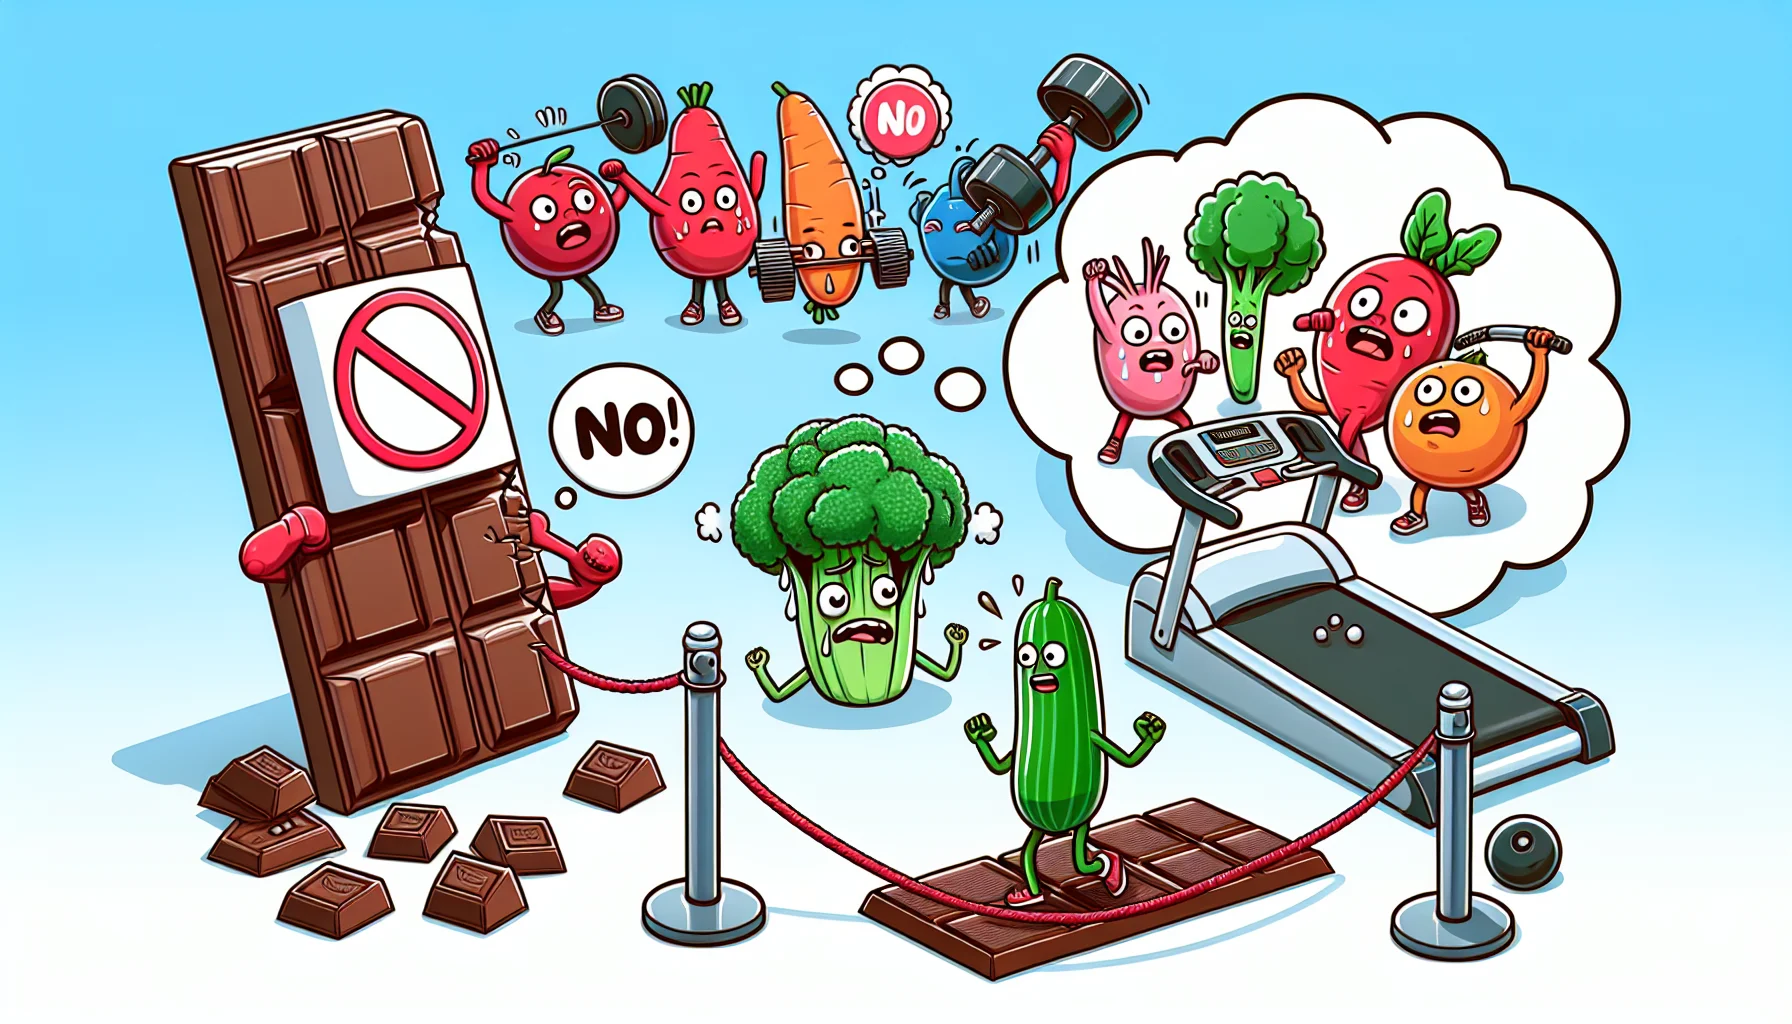 Design an amusing yet informative scene depicting strategies to overcome sugar cravings and enhance fitness: we could see cartoony vegetables literally pushing a bar of chocolate away with a big red 'NO' symbol over it, while on the other side, a humorous depiction of exercise gear such as weights and a treadmill are luring people with open arms, enticing them to work out. Maybe even have a thought bubble coming from a treadmill, dreaming of being used. The entire image should evoke laughter but also inspire people to make healthier choices.